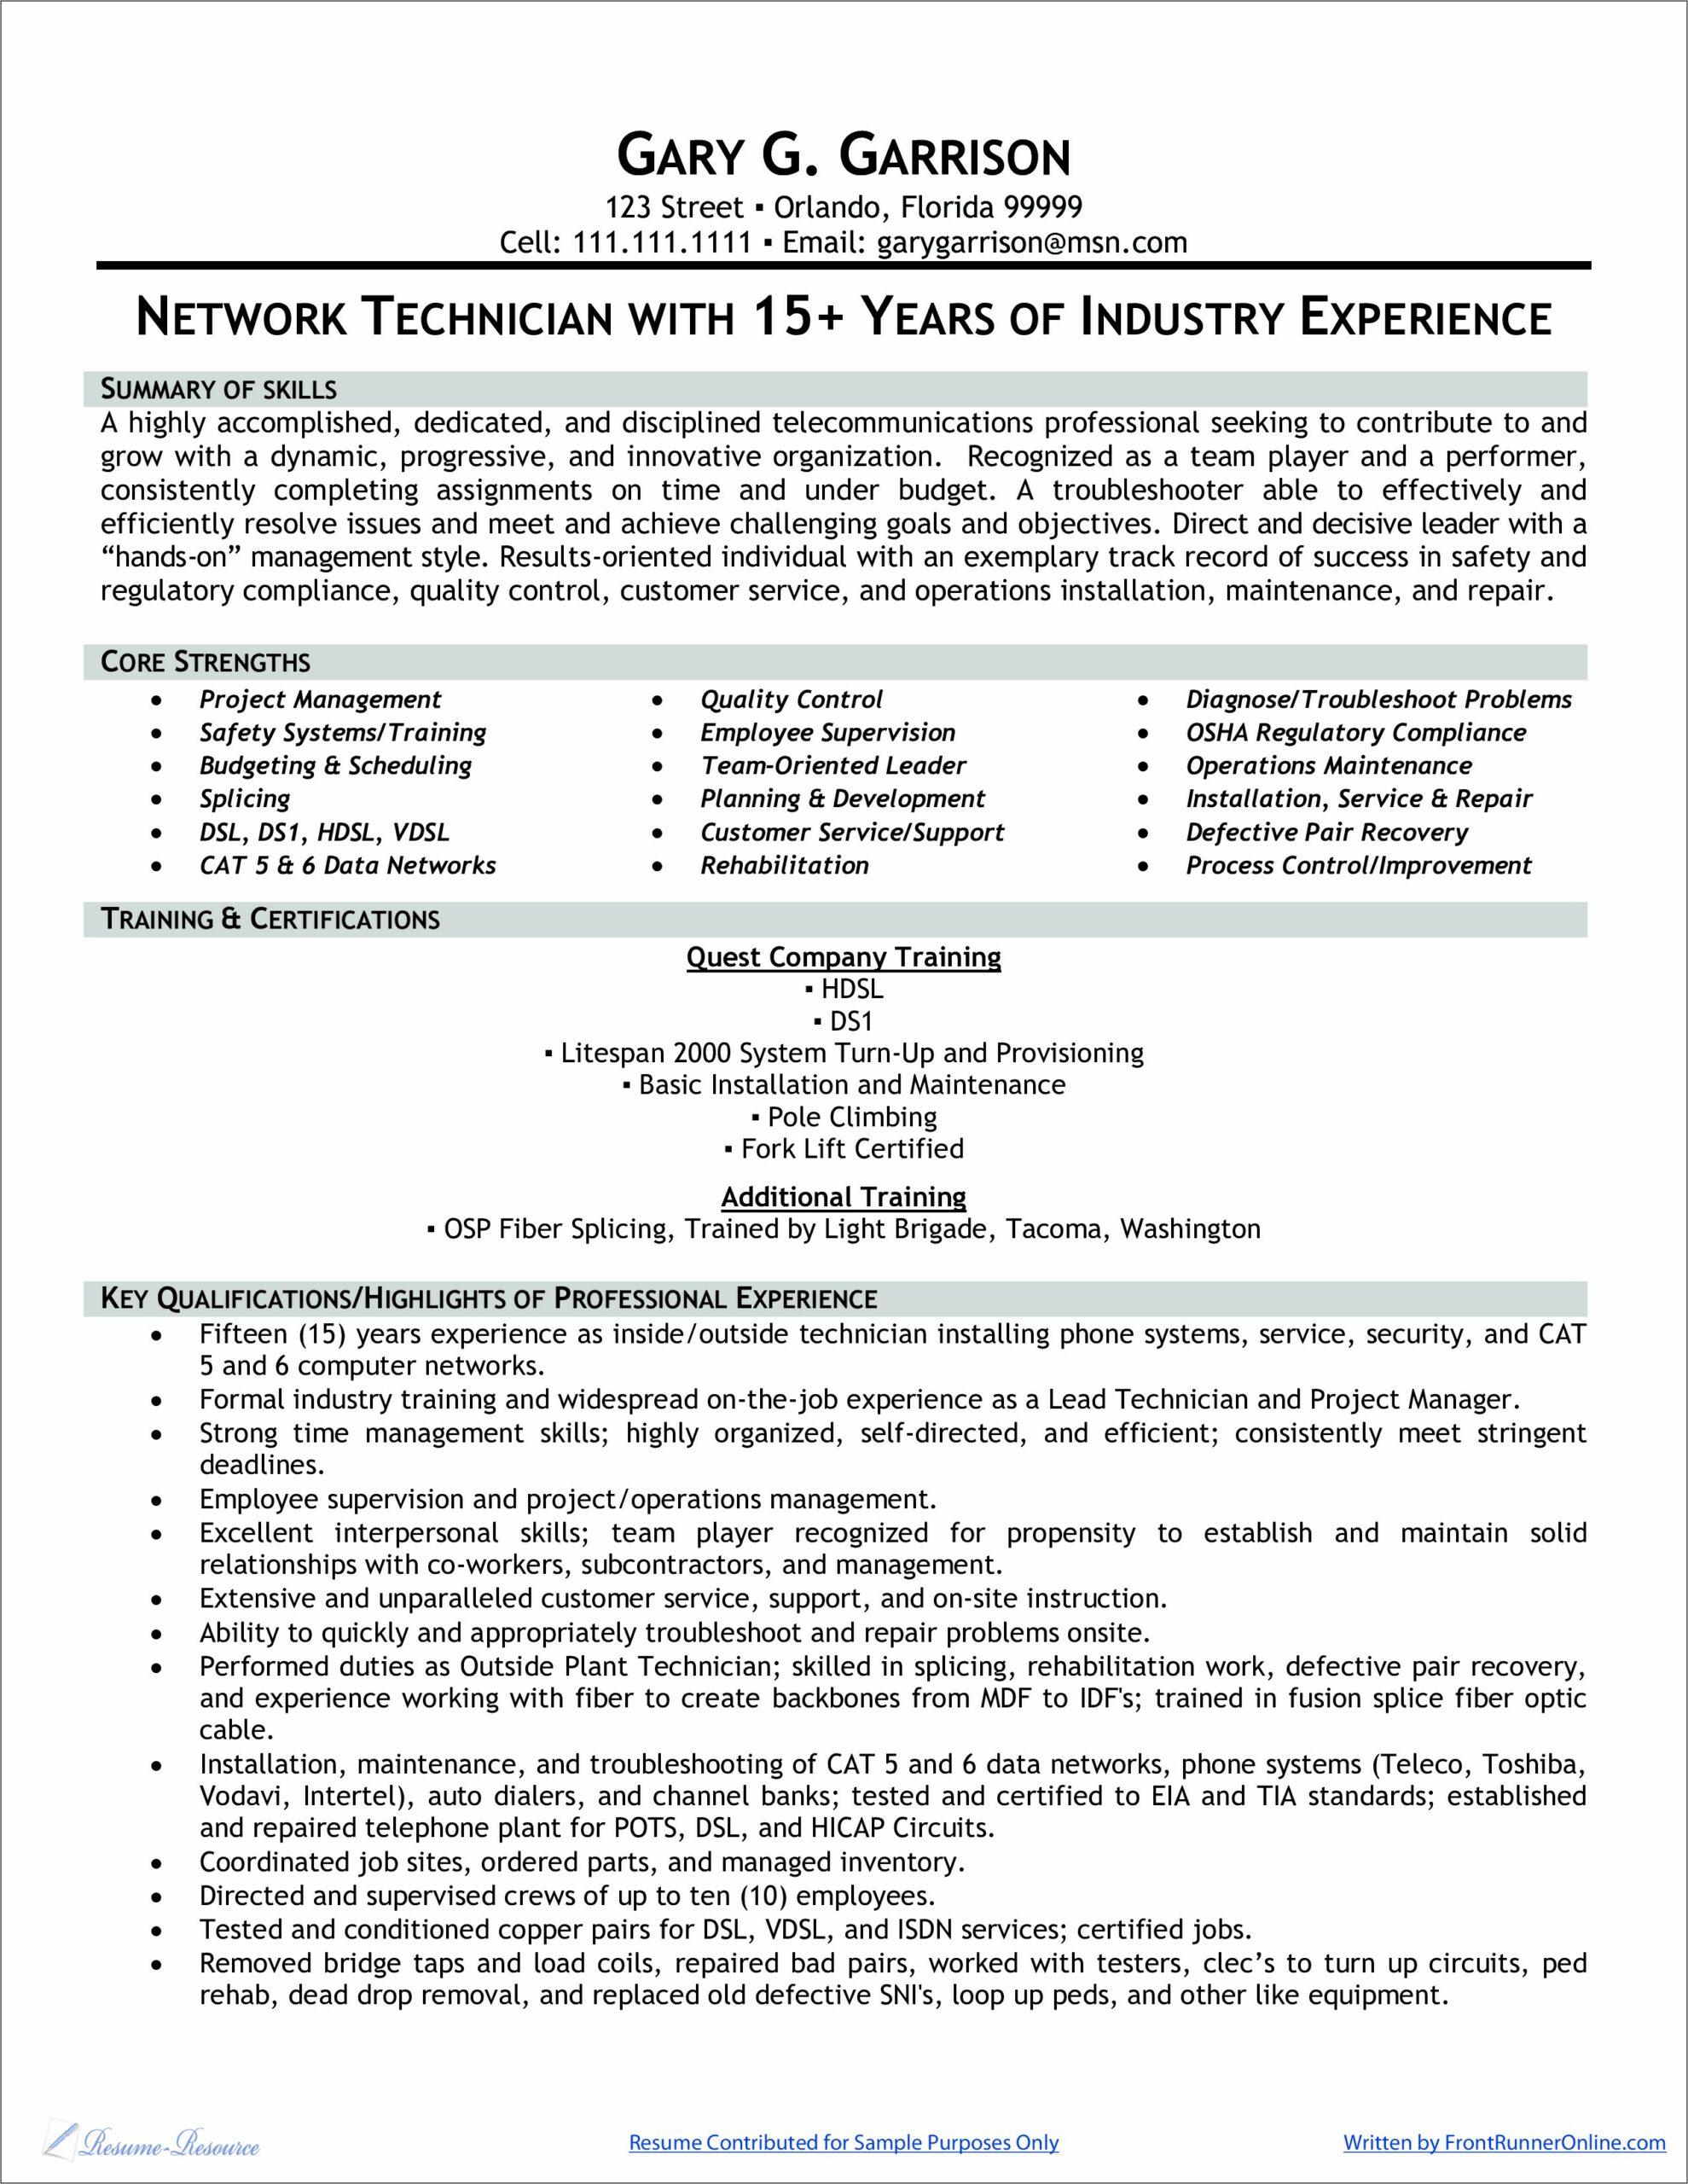 Resume Samples For Telecommunications Technician